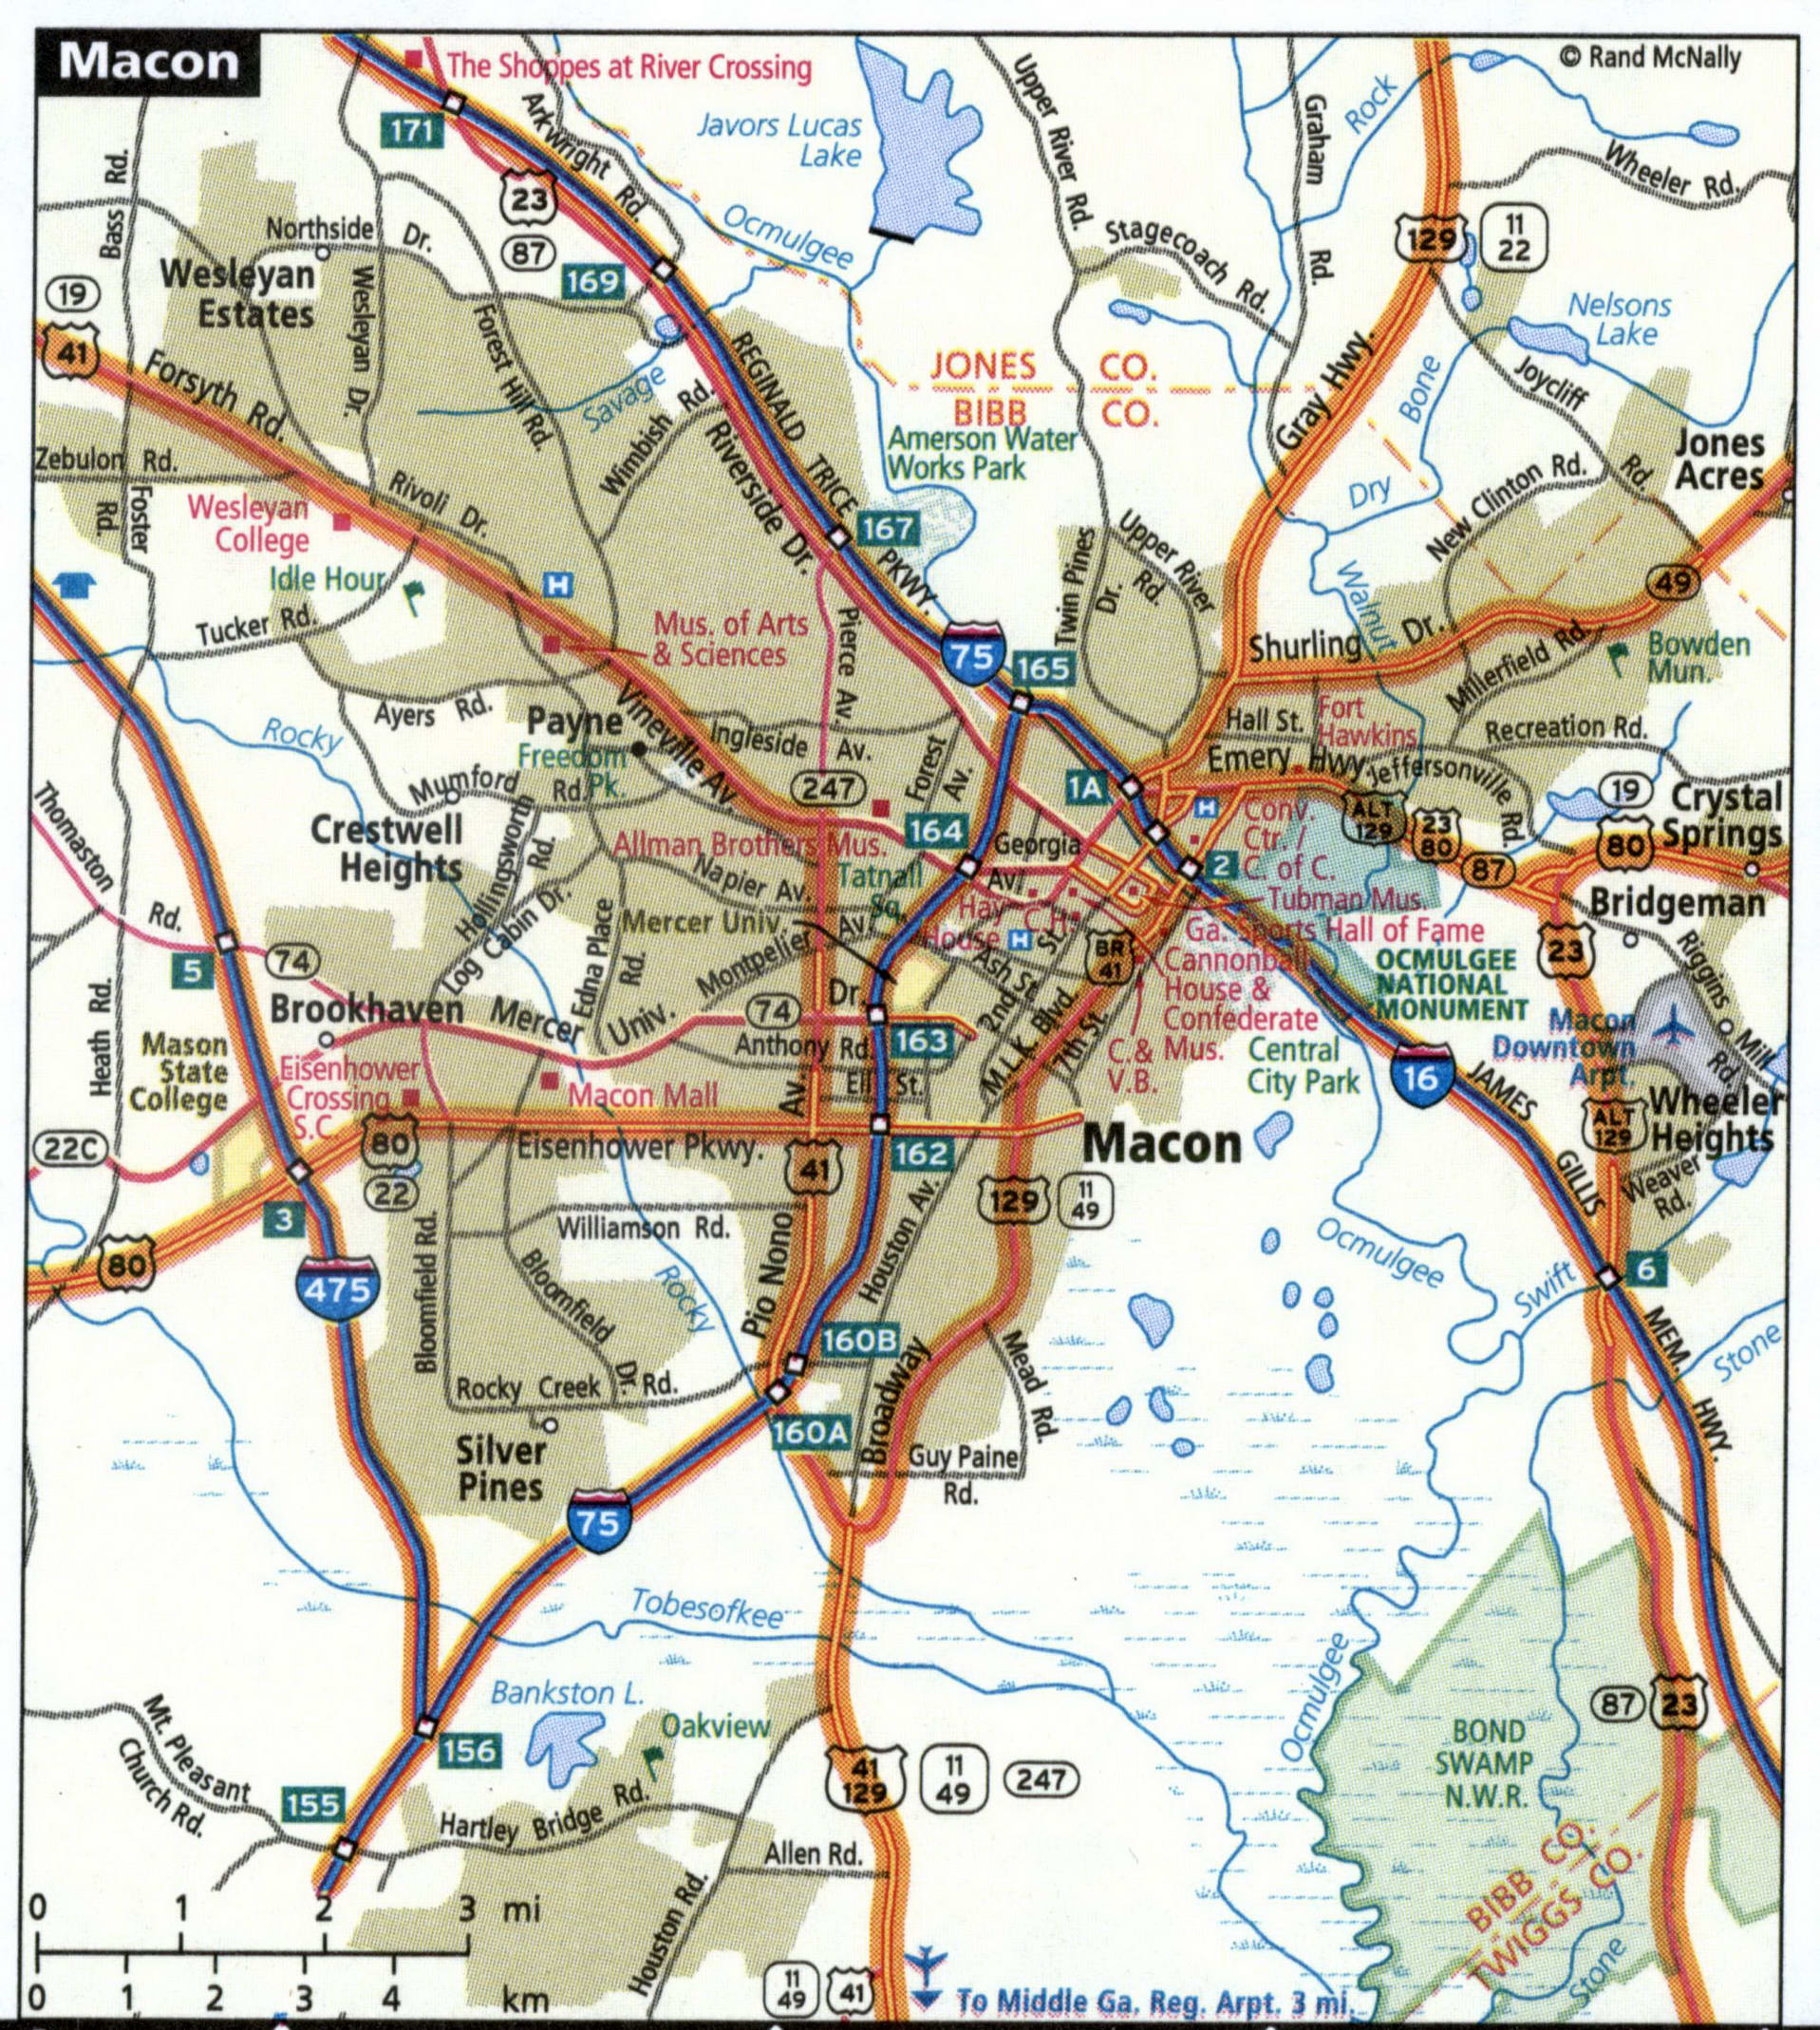 Macon city map for truckers